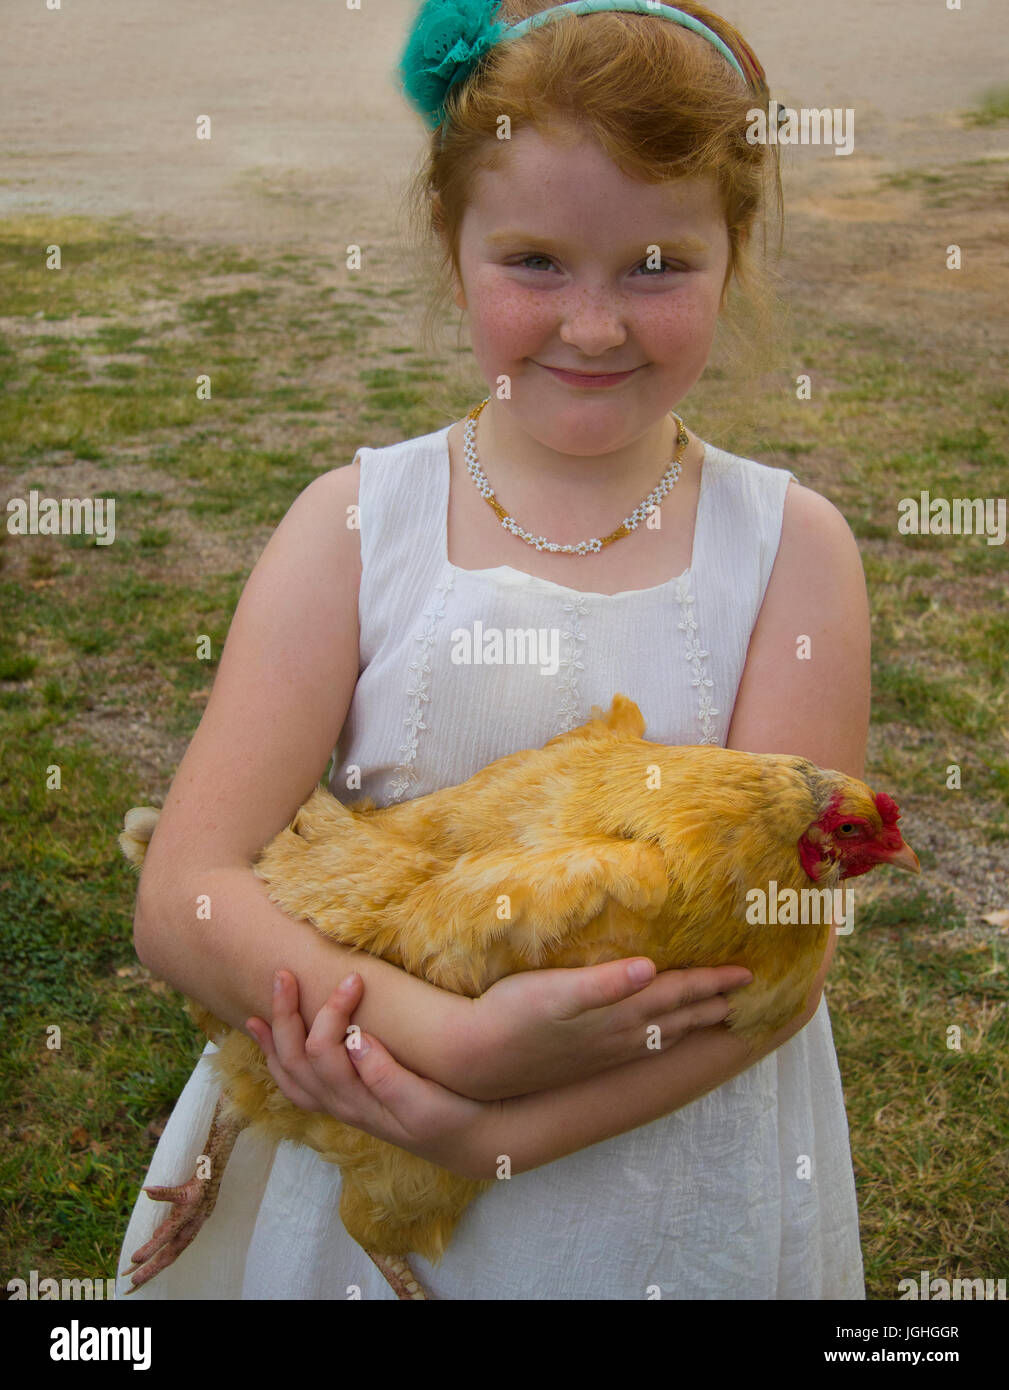 Red headed young girl holding hen on farm Stock Photo